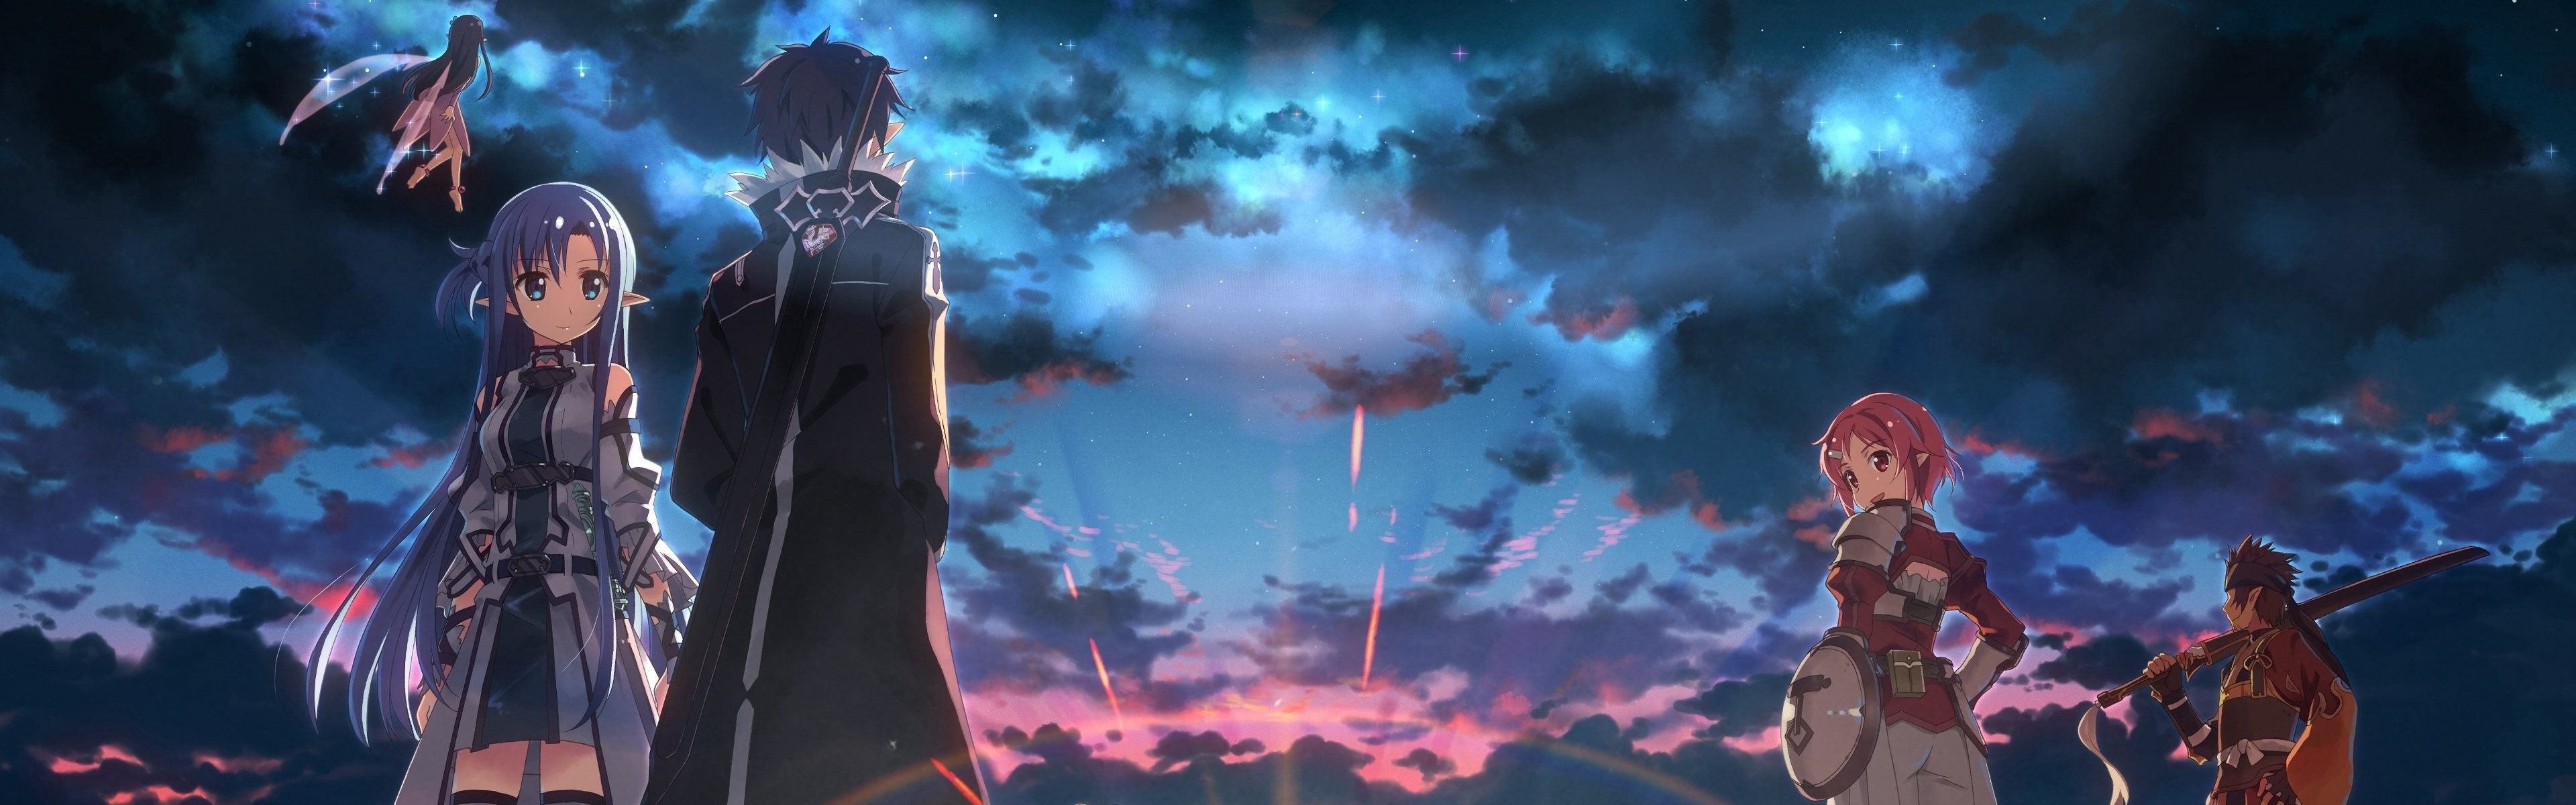 3840x1200 dual monitor wallpaper anime images (33)